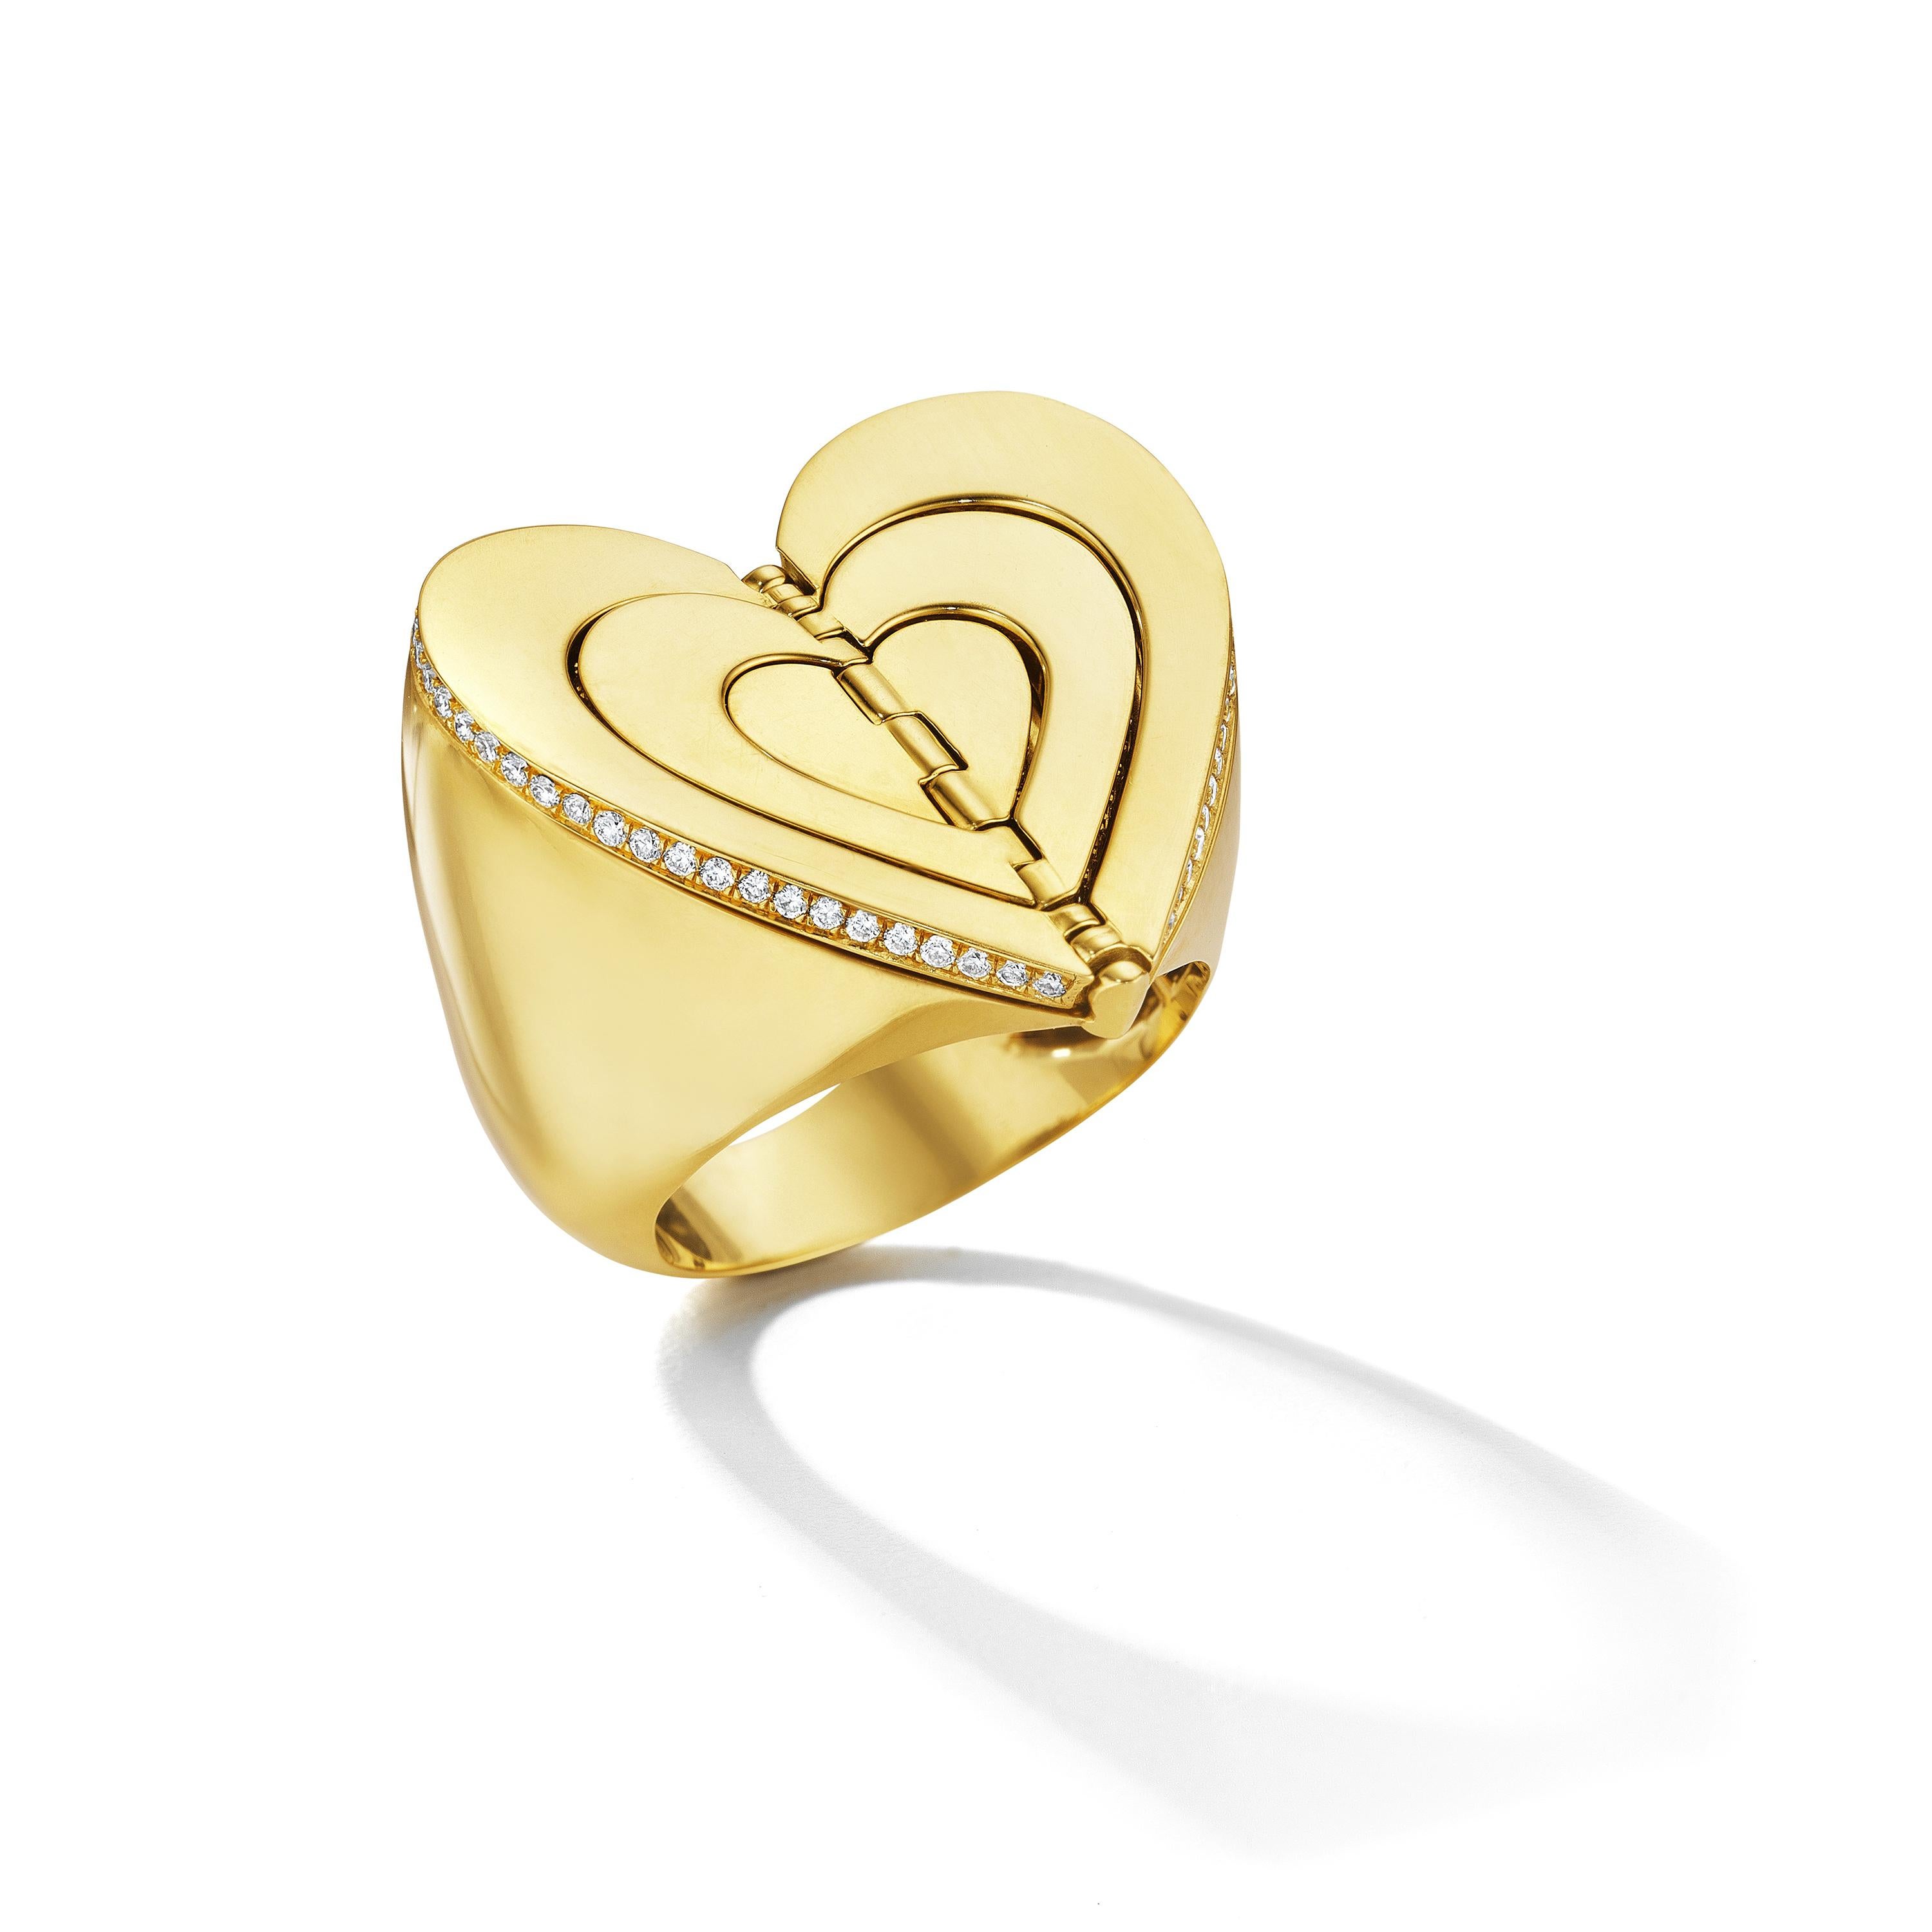 Soulmates in constant flow. A sculptural heart and layered wings make a powerful duet symbolizing the essence of love: vitality in union and the power to soar -- both together and individually. Handcrafted in high polished 18K yellow gold and